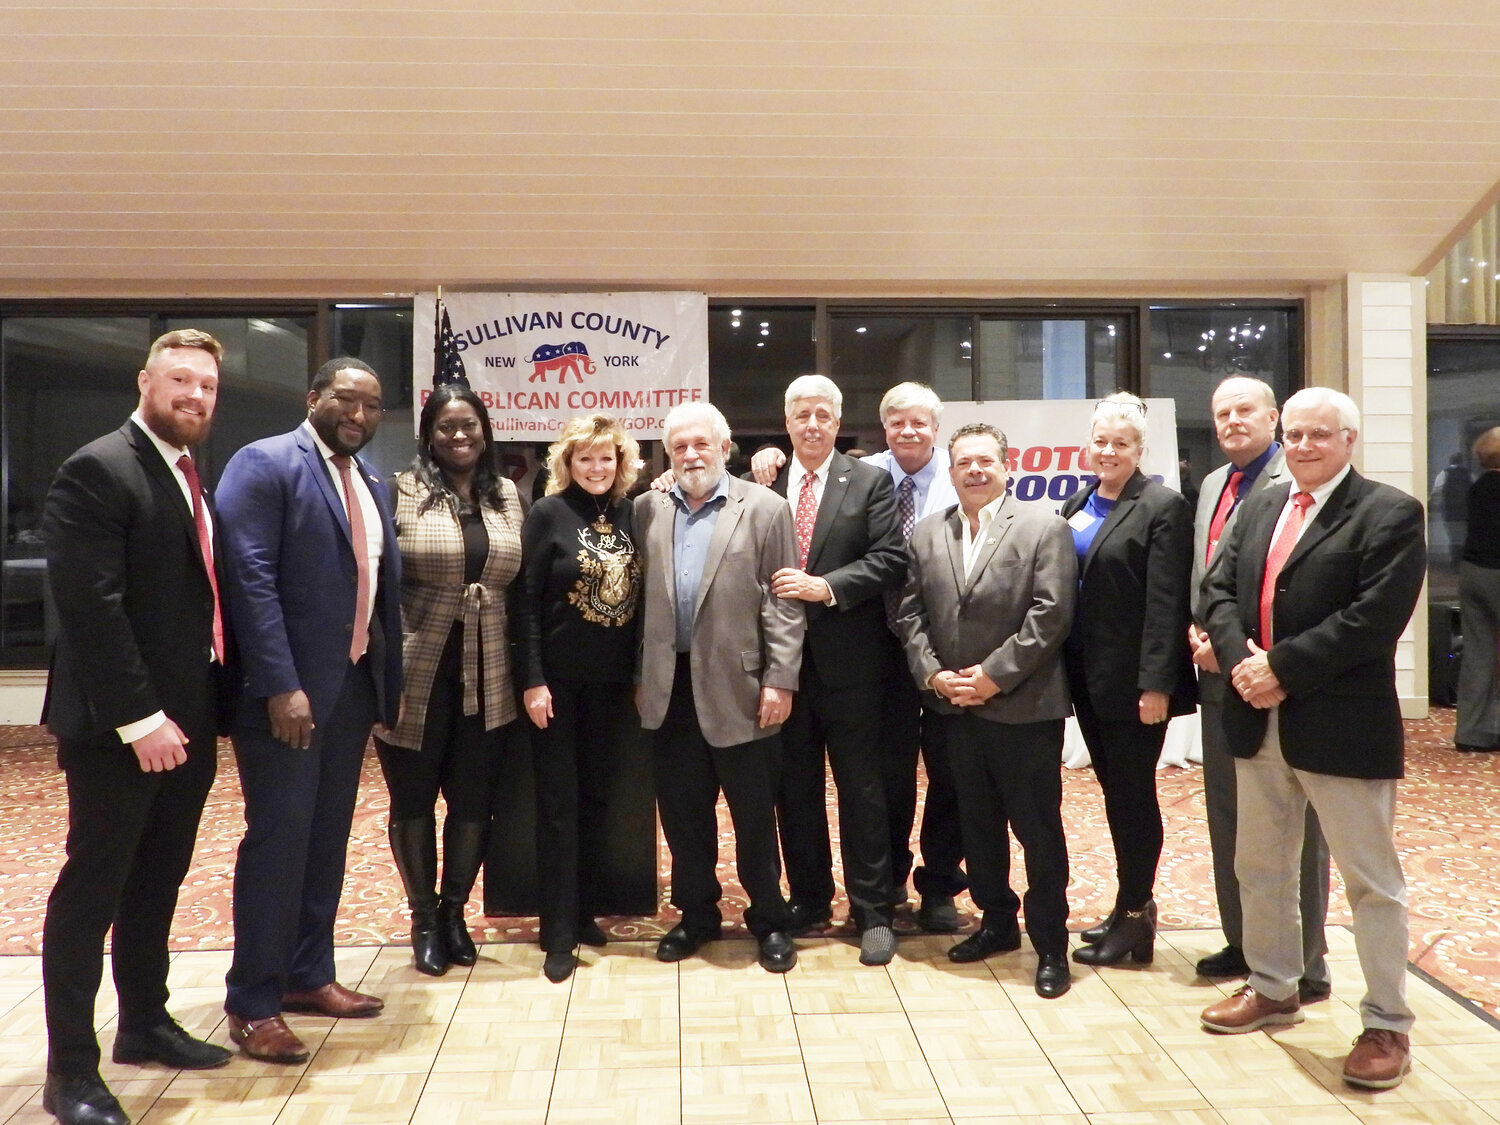 County Republicans gather for annual dinner leaders call for unity